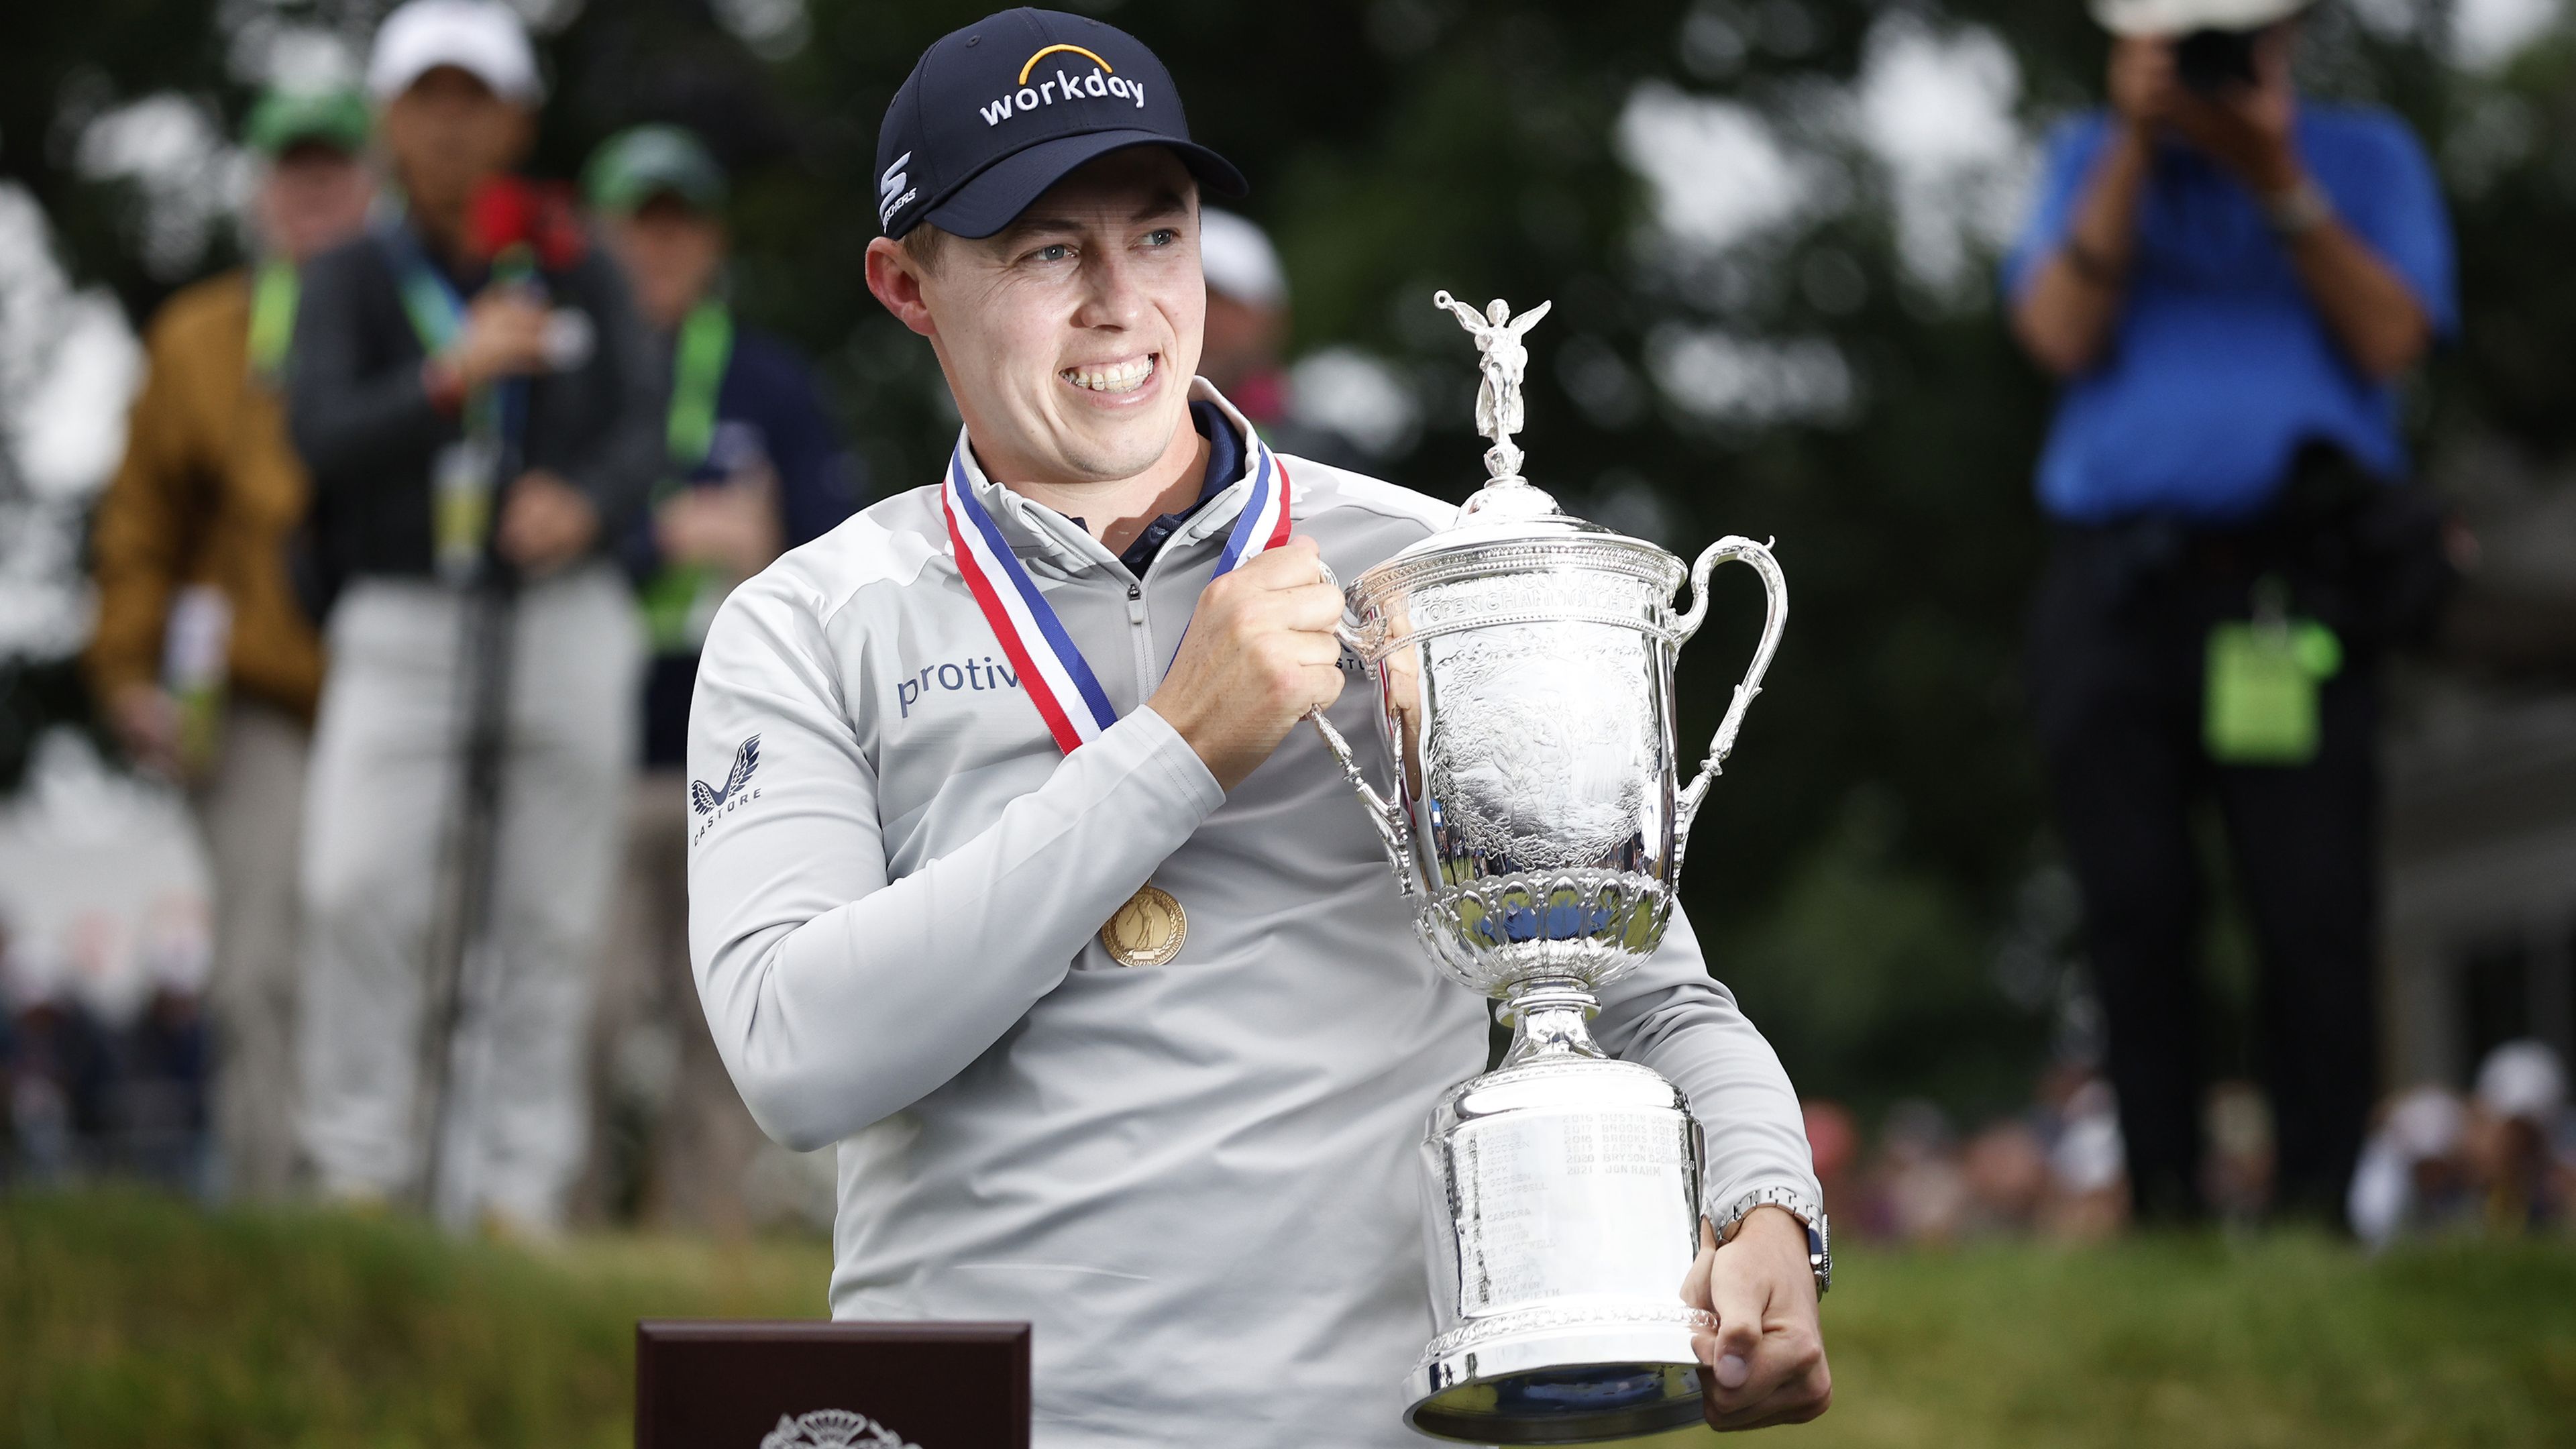 Mates 'raged all night' in Matt Fitzpatrick's house as he got ready to win US Open